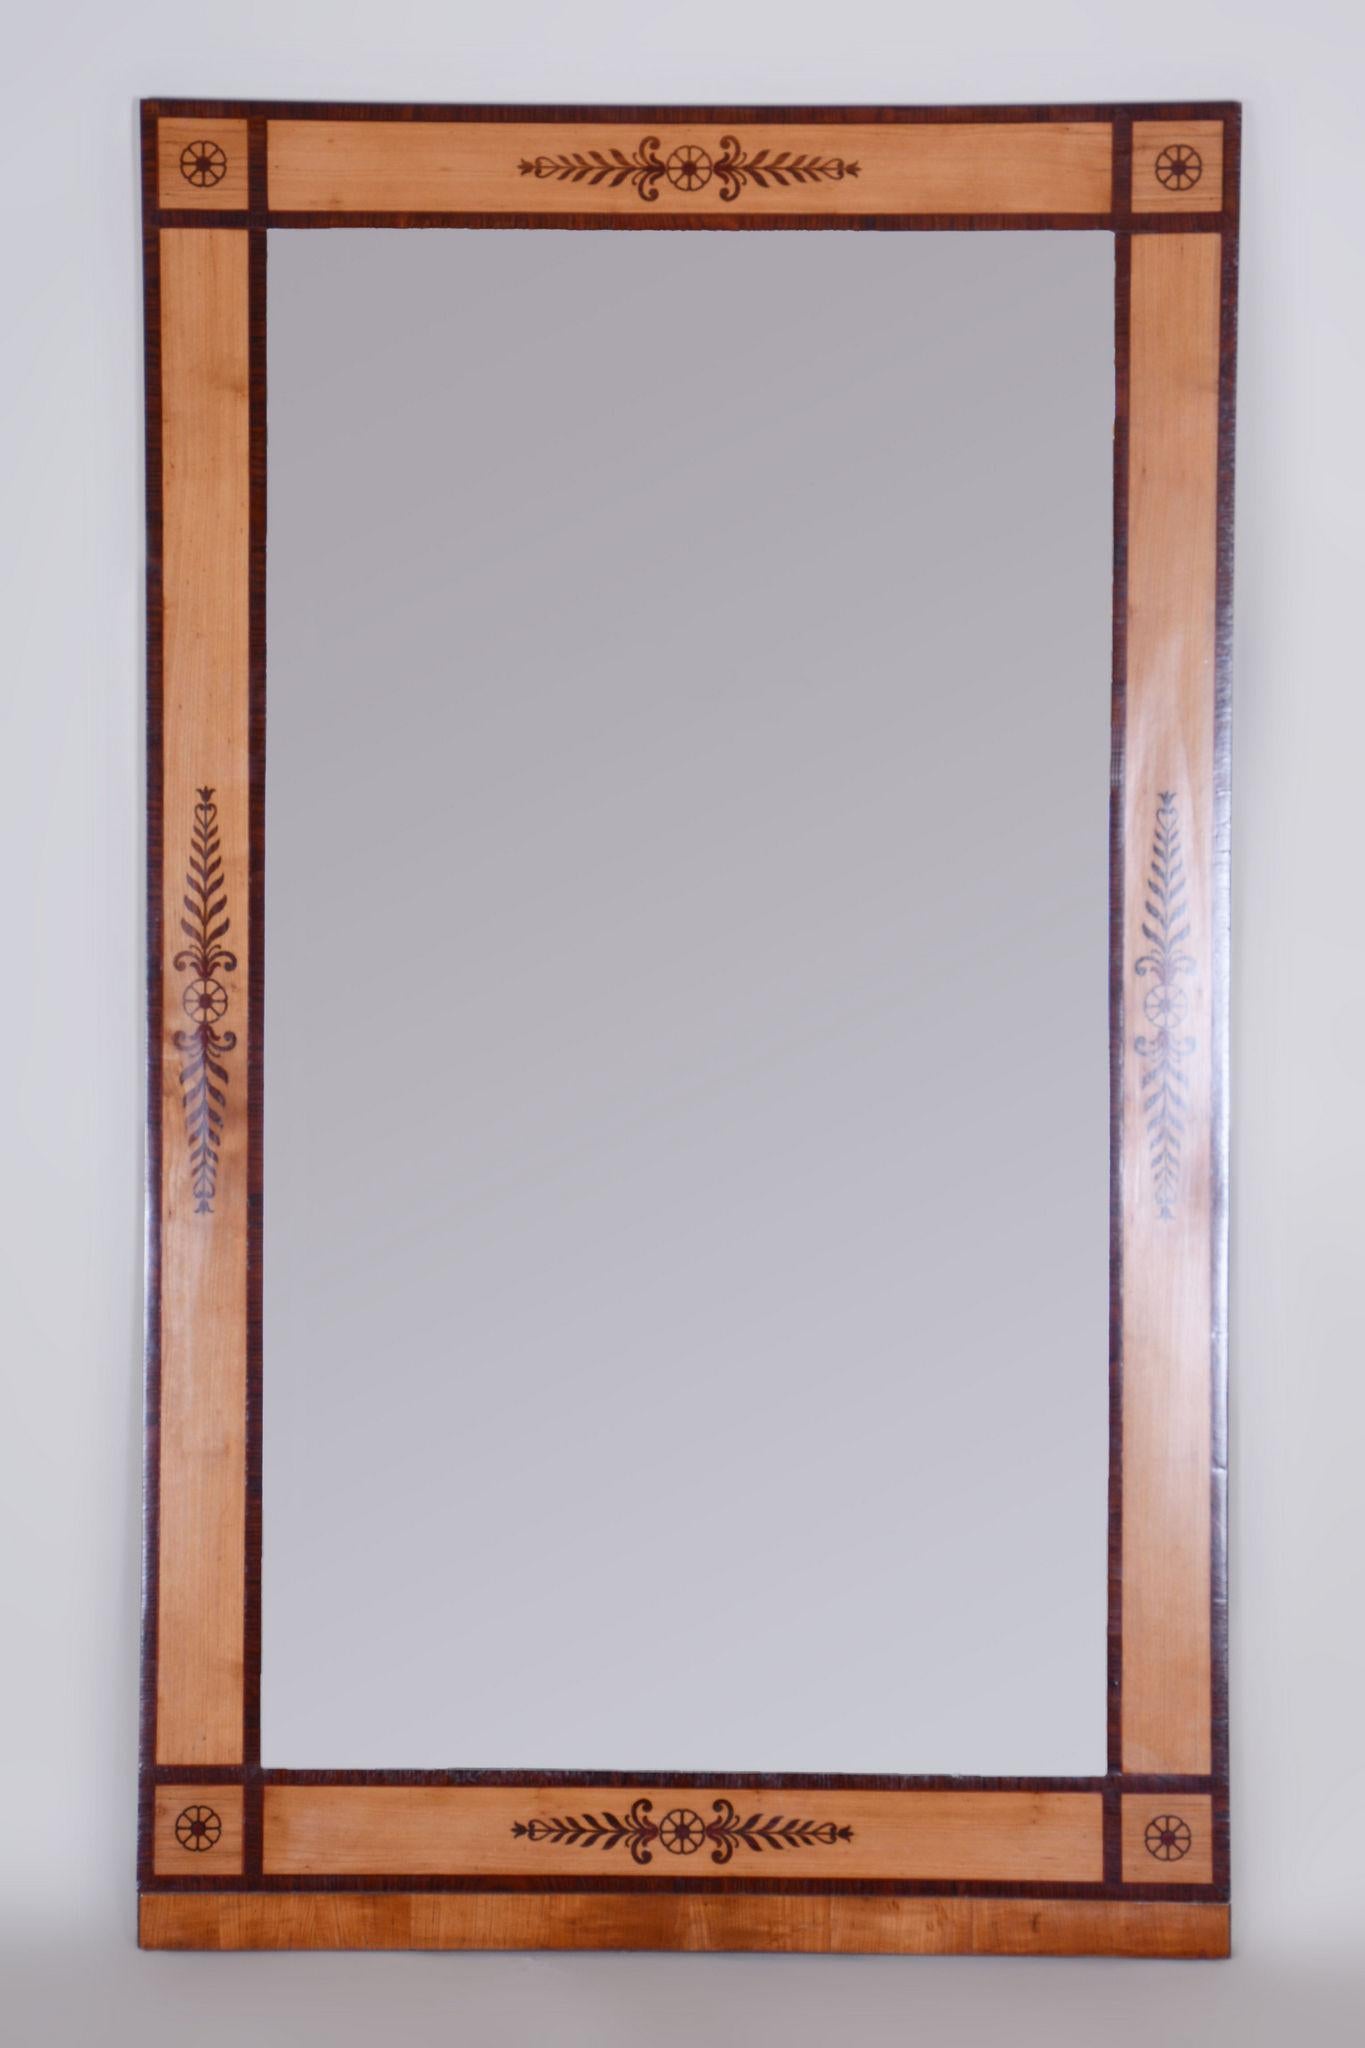 Biedermeier restored mirror in the frame

Period: 1830-1839
Source: Austria

Our professional refurbishing team in Czechia has fully restored it according to the original process. 
This item features classic Biedermeier elements. Visual simplicity,